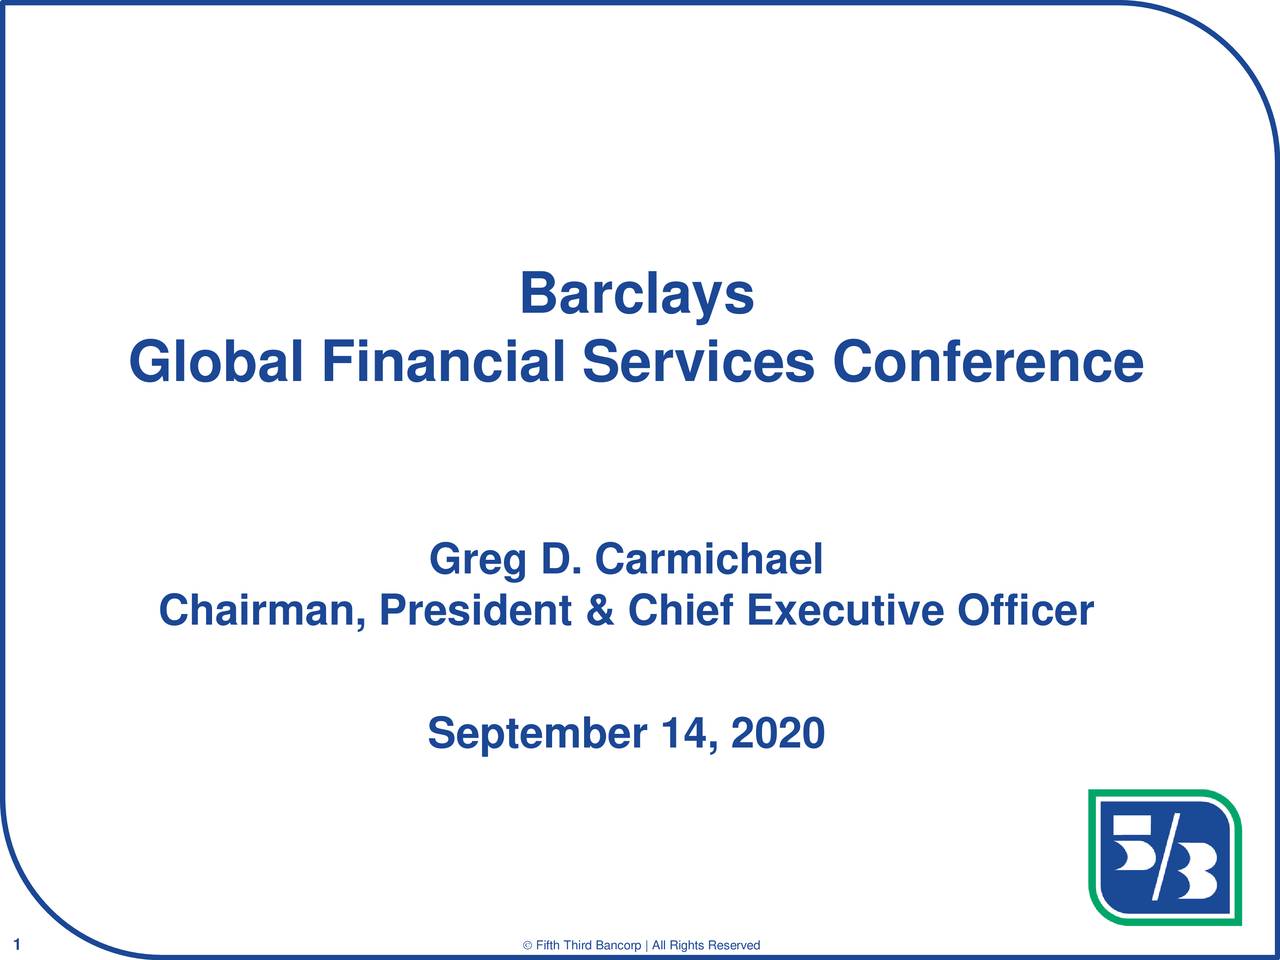 Fifth Third Bancorp Presents At Barclays Global Financial Services Conference